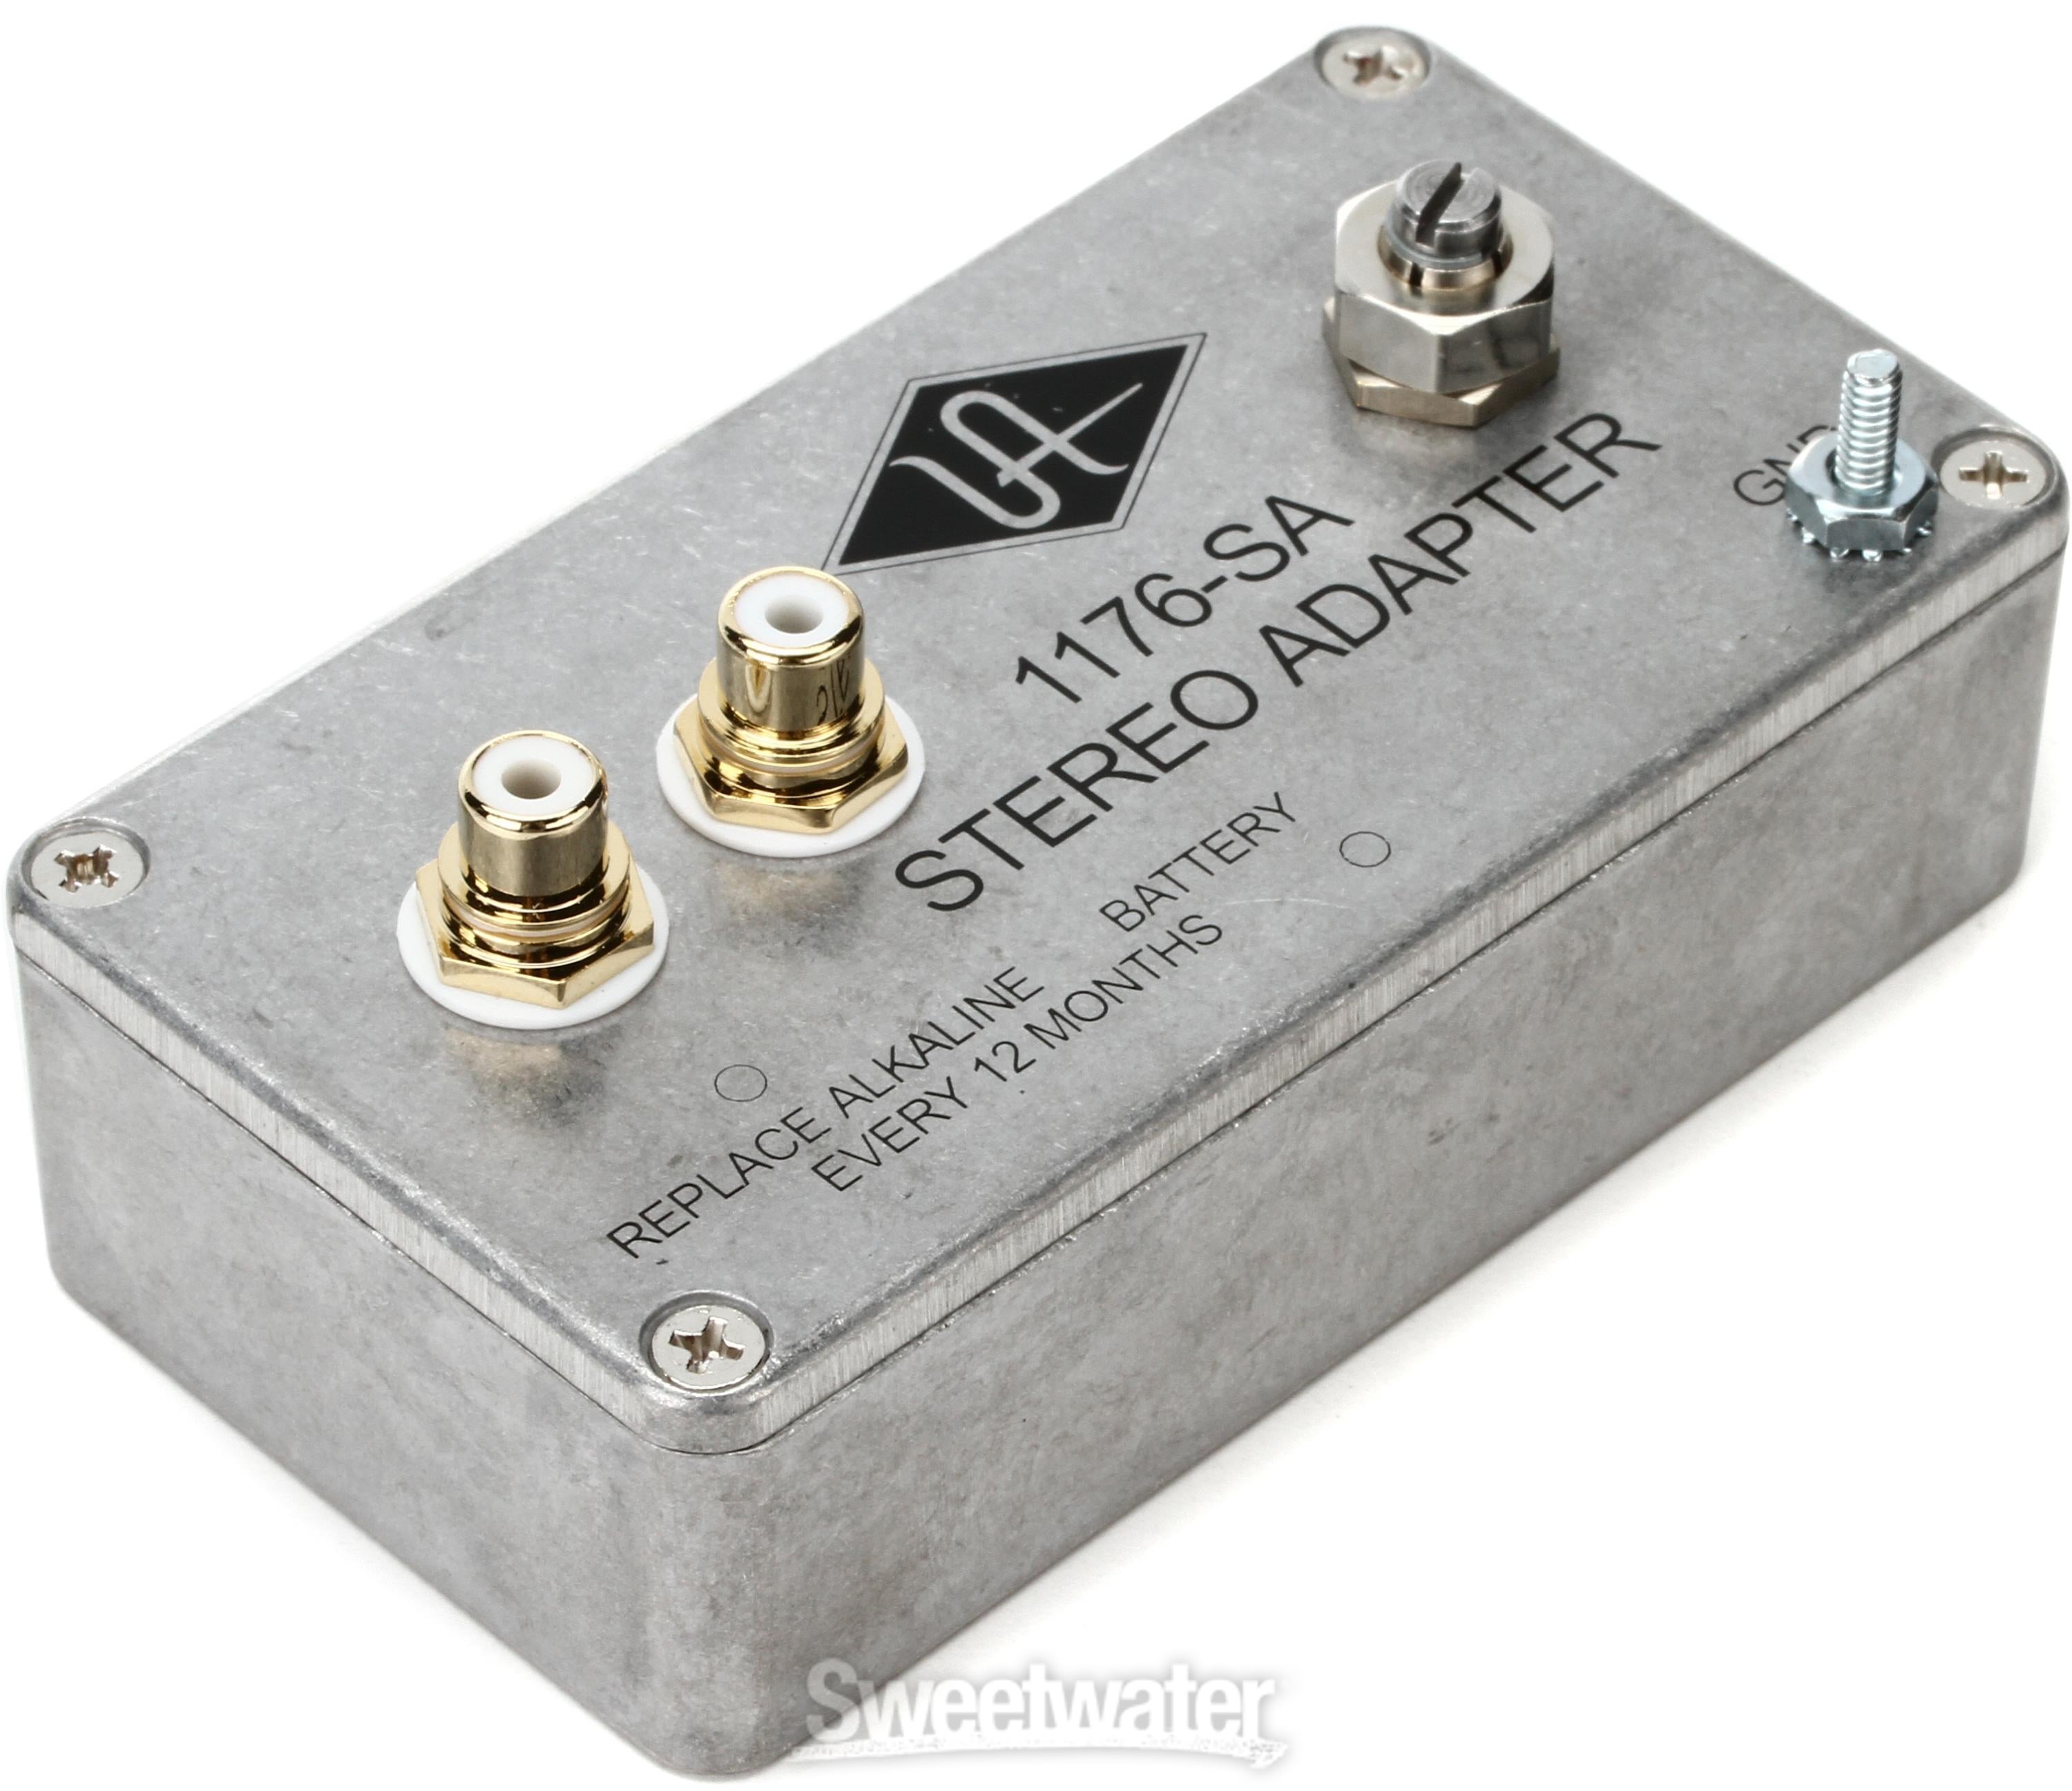 Universal Audio 1176-SA Stereo Adapter 1176 Limiting Amplifiers